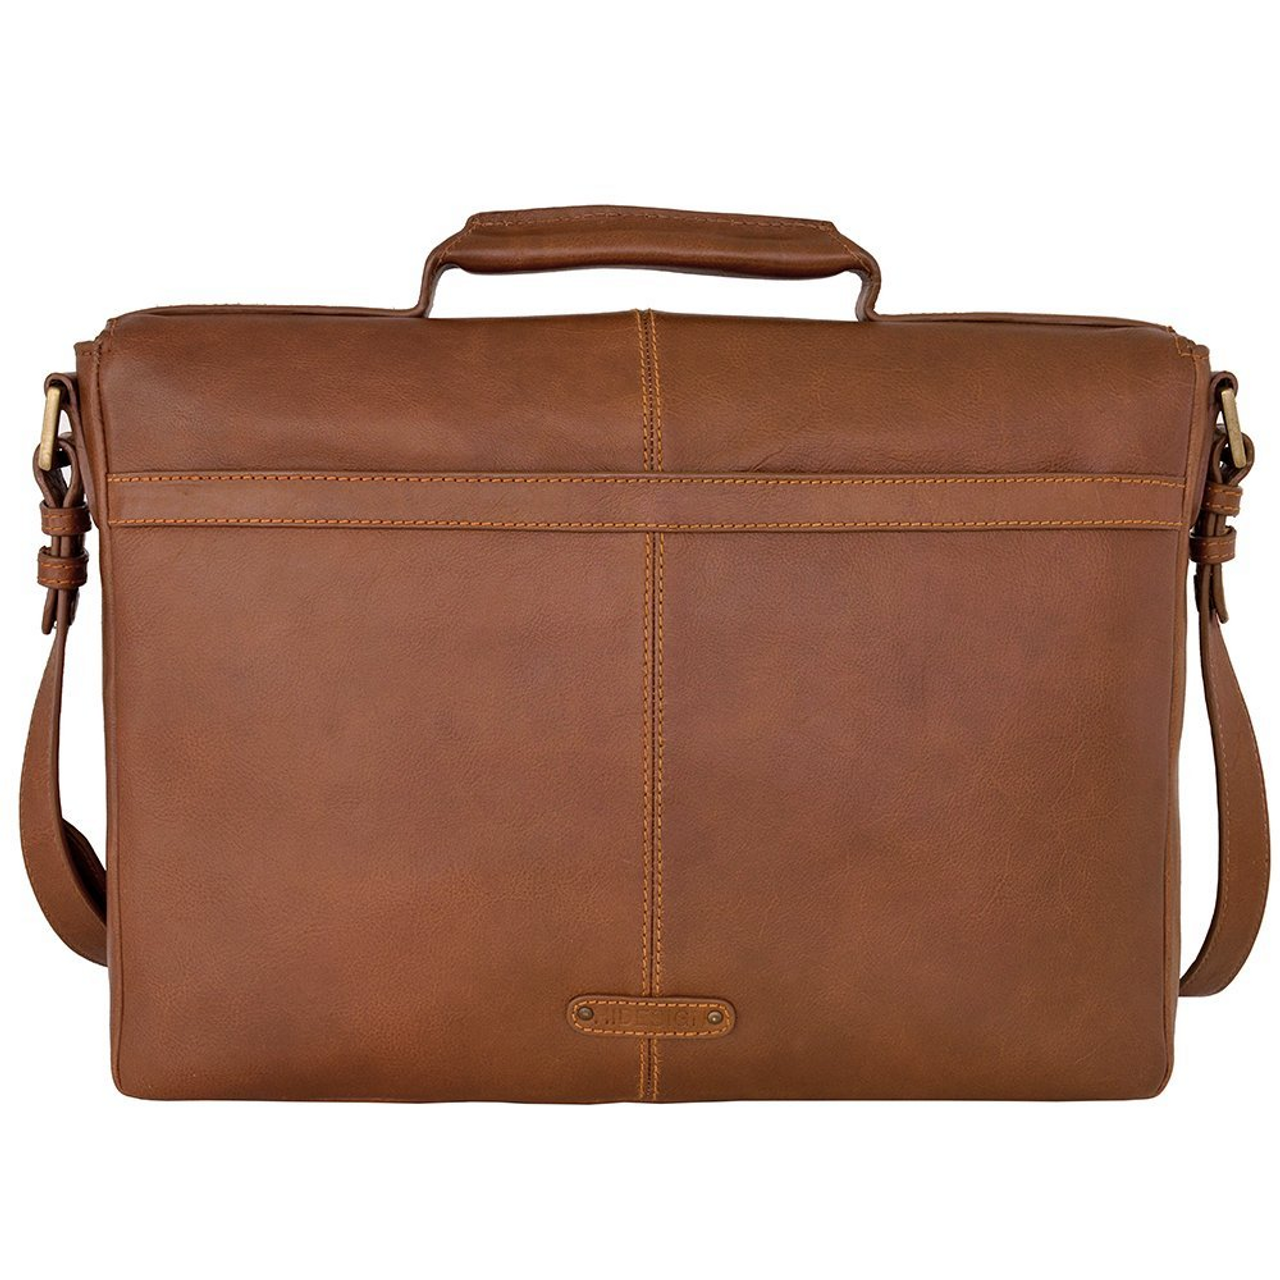 Charles Leather 15" Laptop Compatible Briefcase - Leather Loom